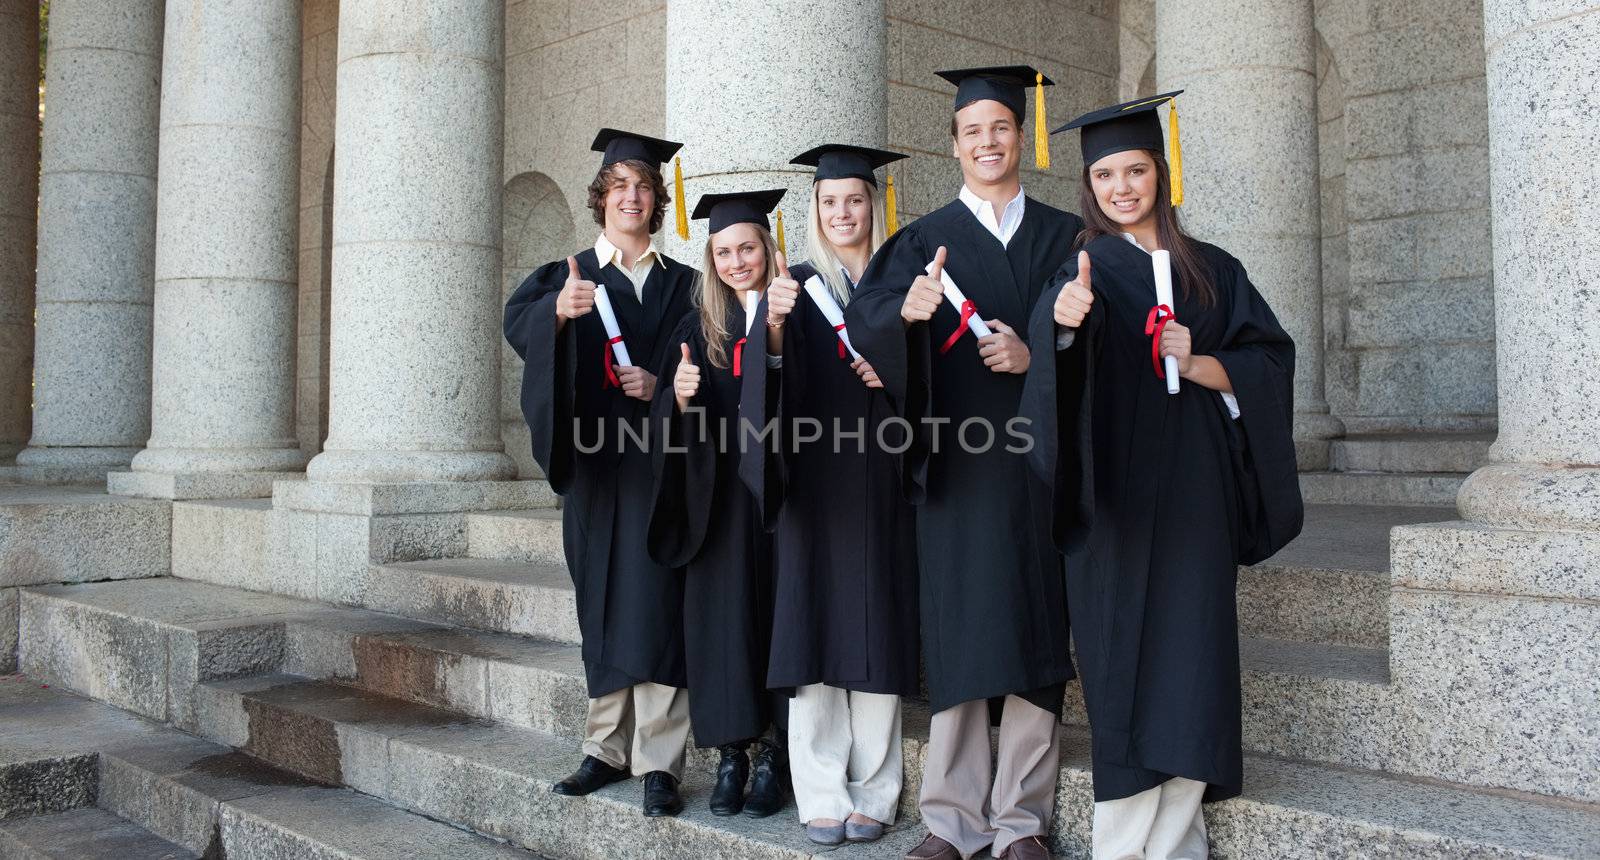 Five happy graduates posing the thumb-up in front of the university